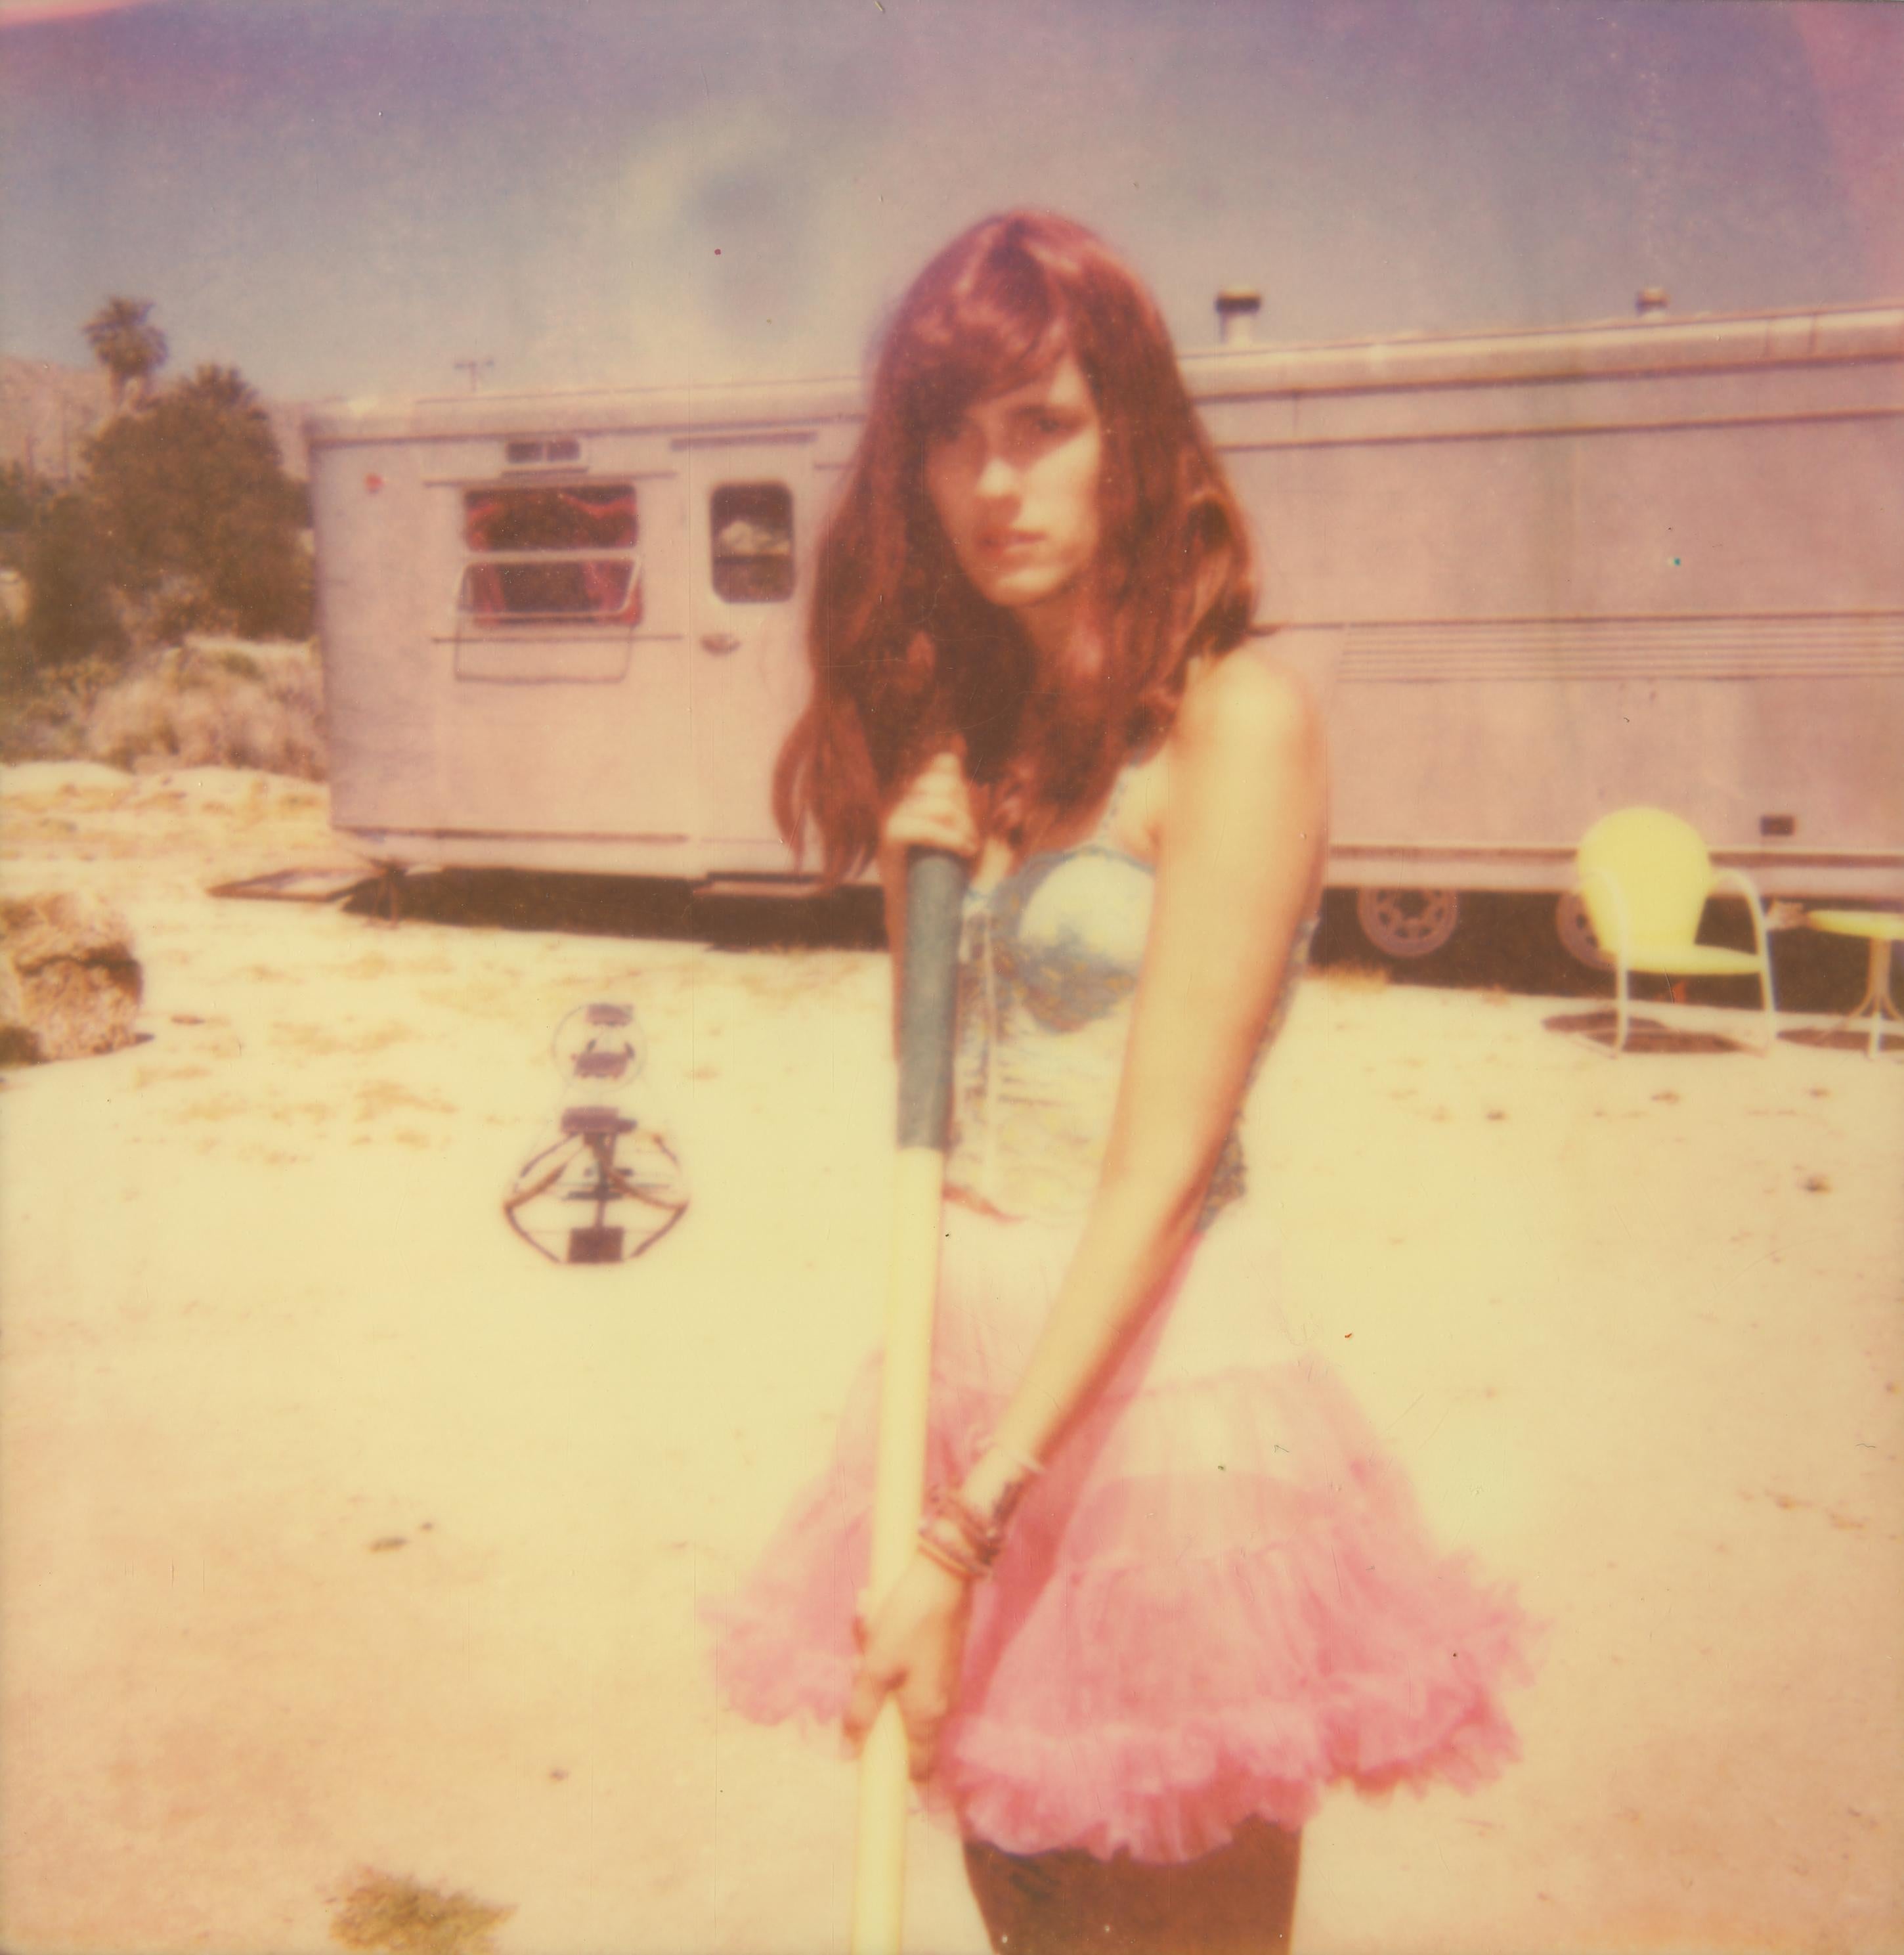 Stefanie Schneider Color Photograph - A lonely and deserted Place (The Girl behind the White Picket Fence) -  Polaroid